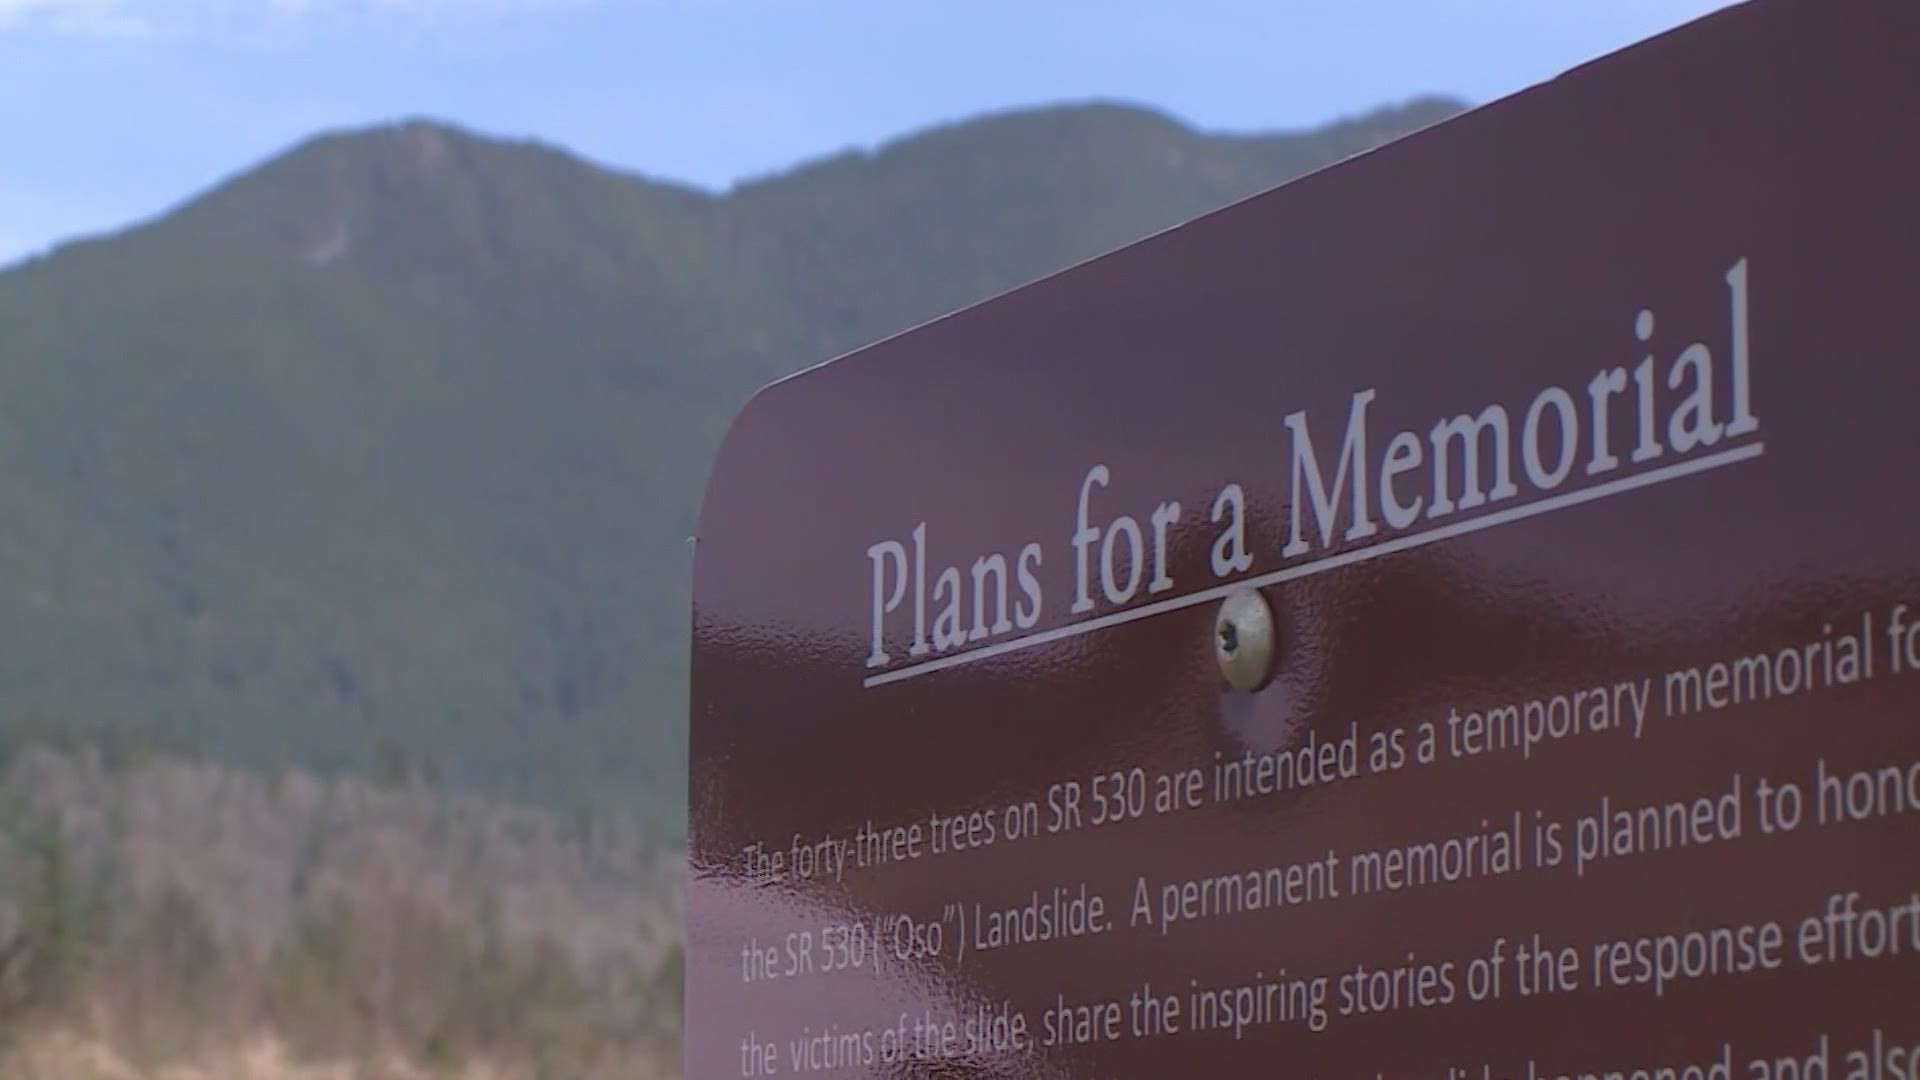 The pandemic hindered progress on a permanent memorial to the victims, survivors and the first responders of the Oso landslide.